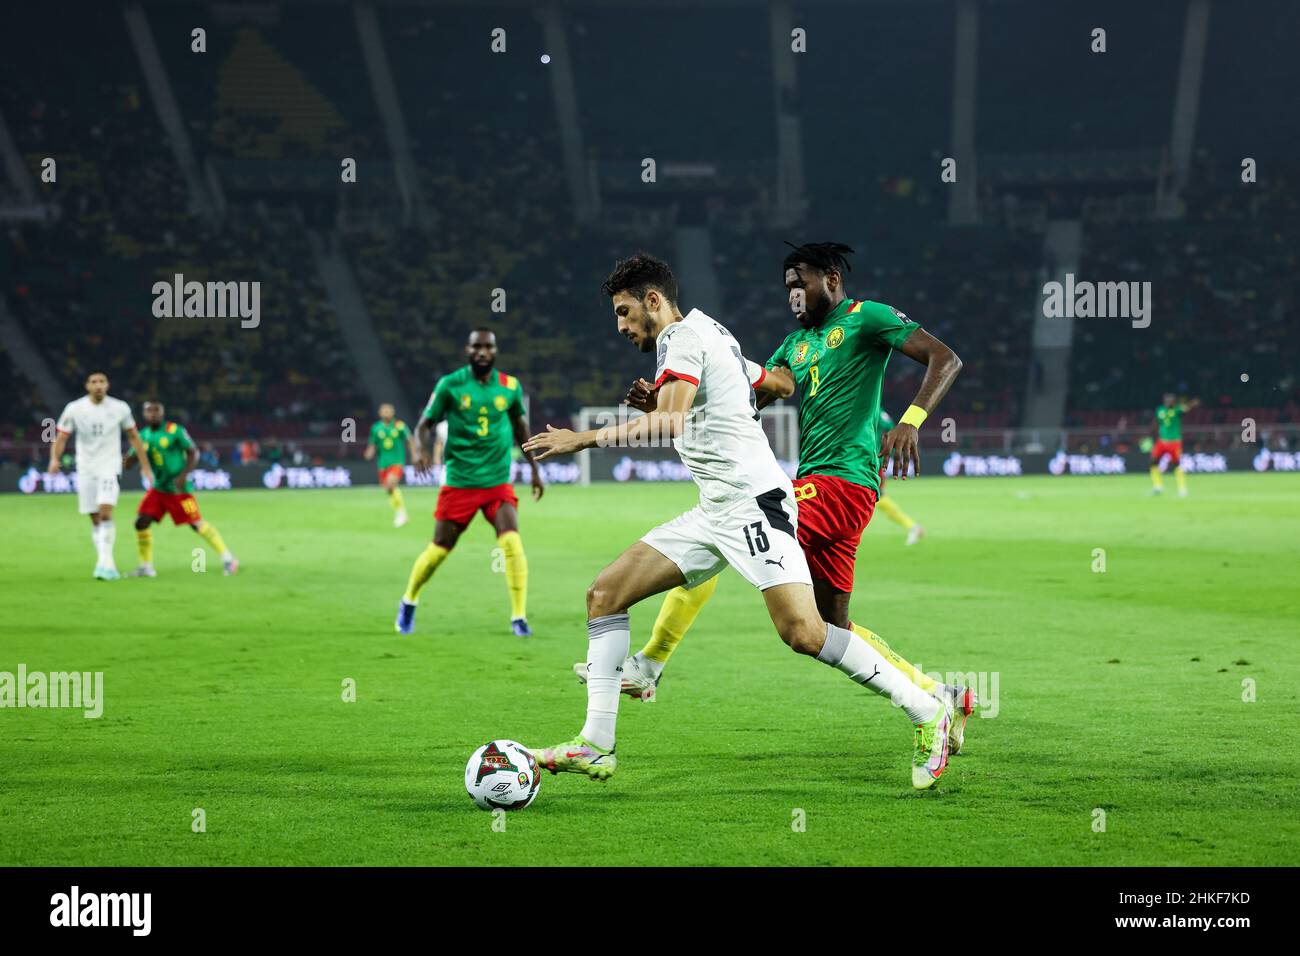 CAMEROON, Yaounde, 03 February 2022 - Ahmed El Fotouh of Egypt control ball and Andre Zambo Anguissa of Cameroon during the Africa Cup of Nations play offs semi final match between Cameroon and Egypt at Stade d'Olembe, Yaounde, Cameroon, 03/02/2022/ Photo by SF Credit: Sebo47/Alamy Live News Stock Photo